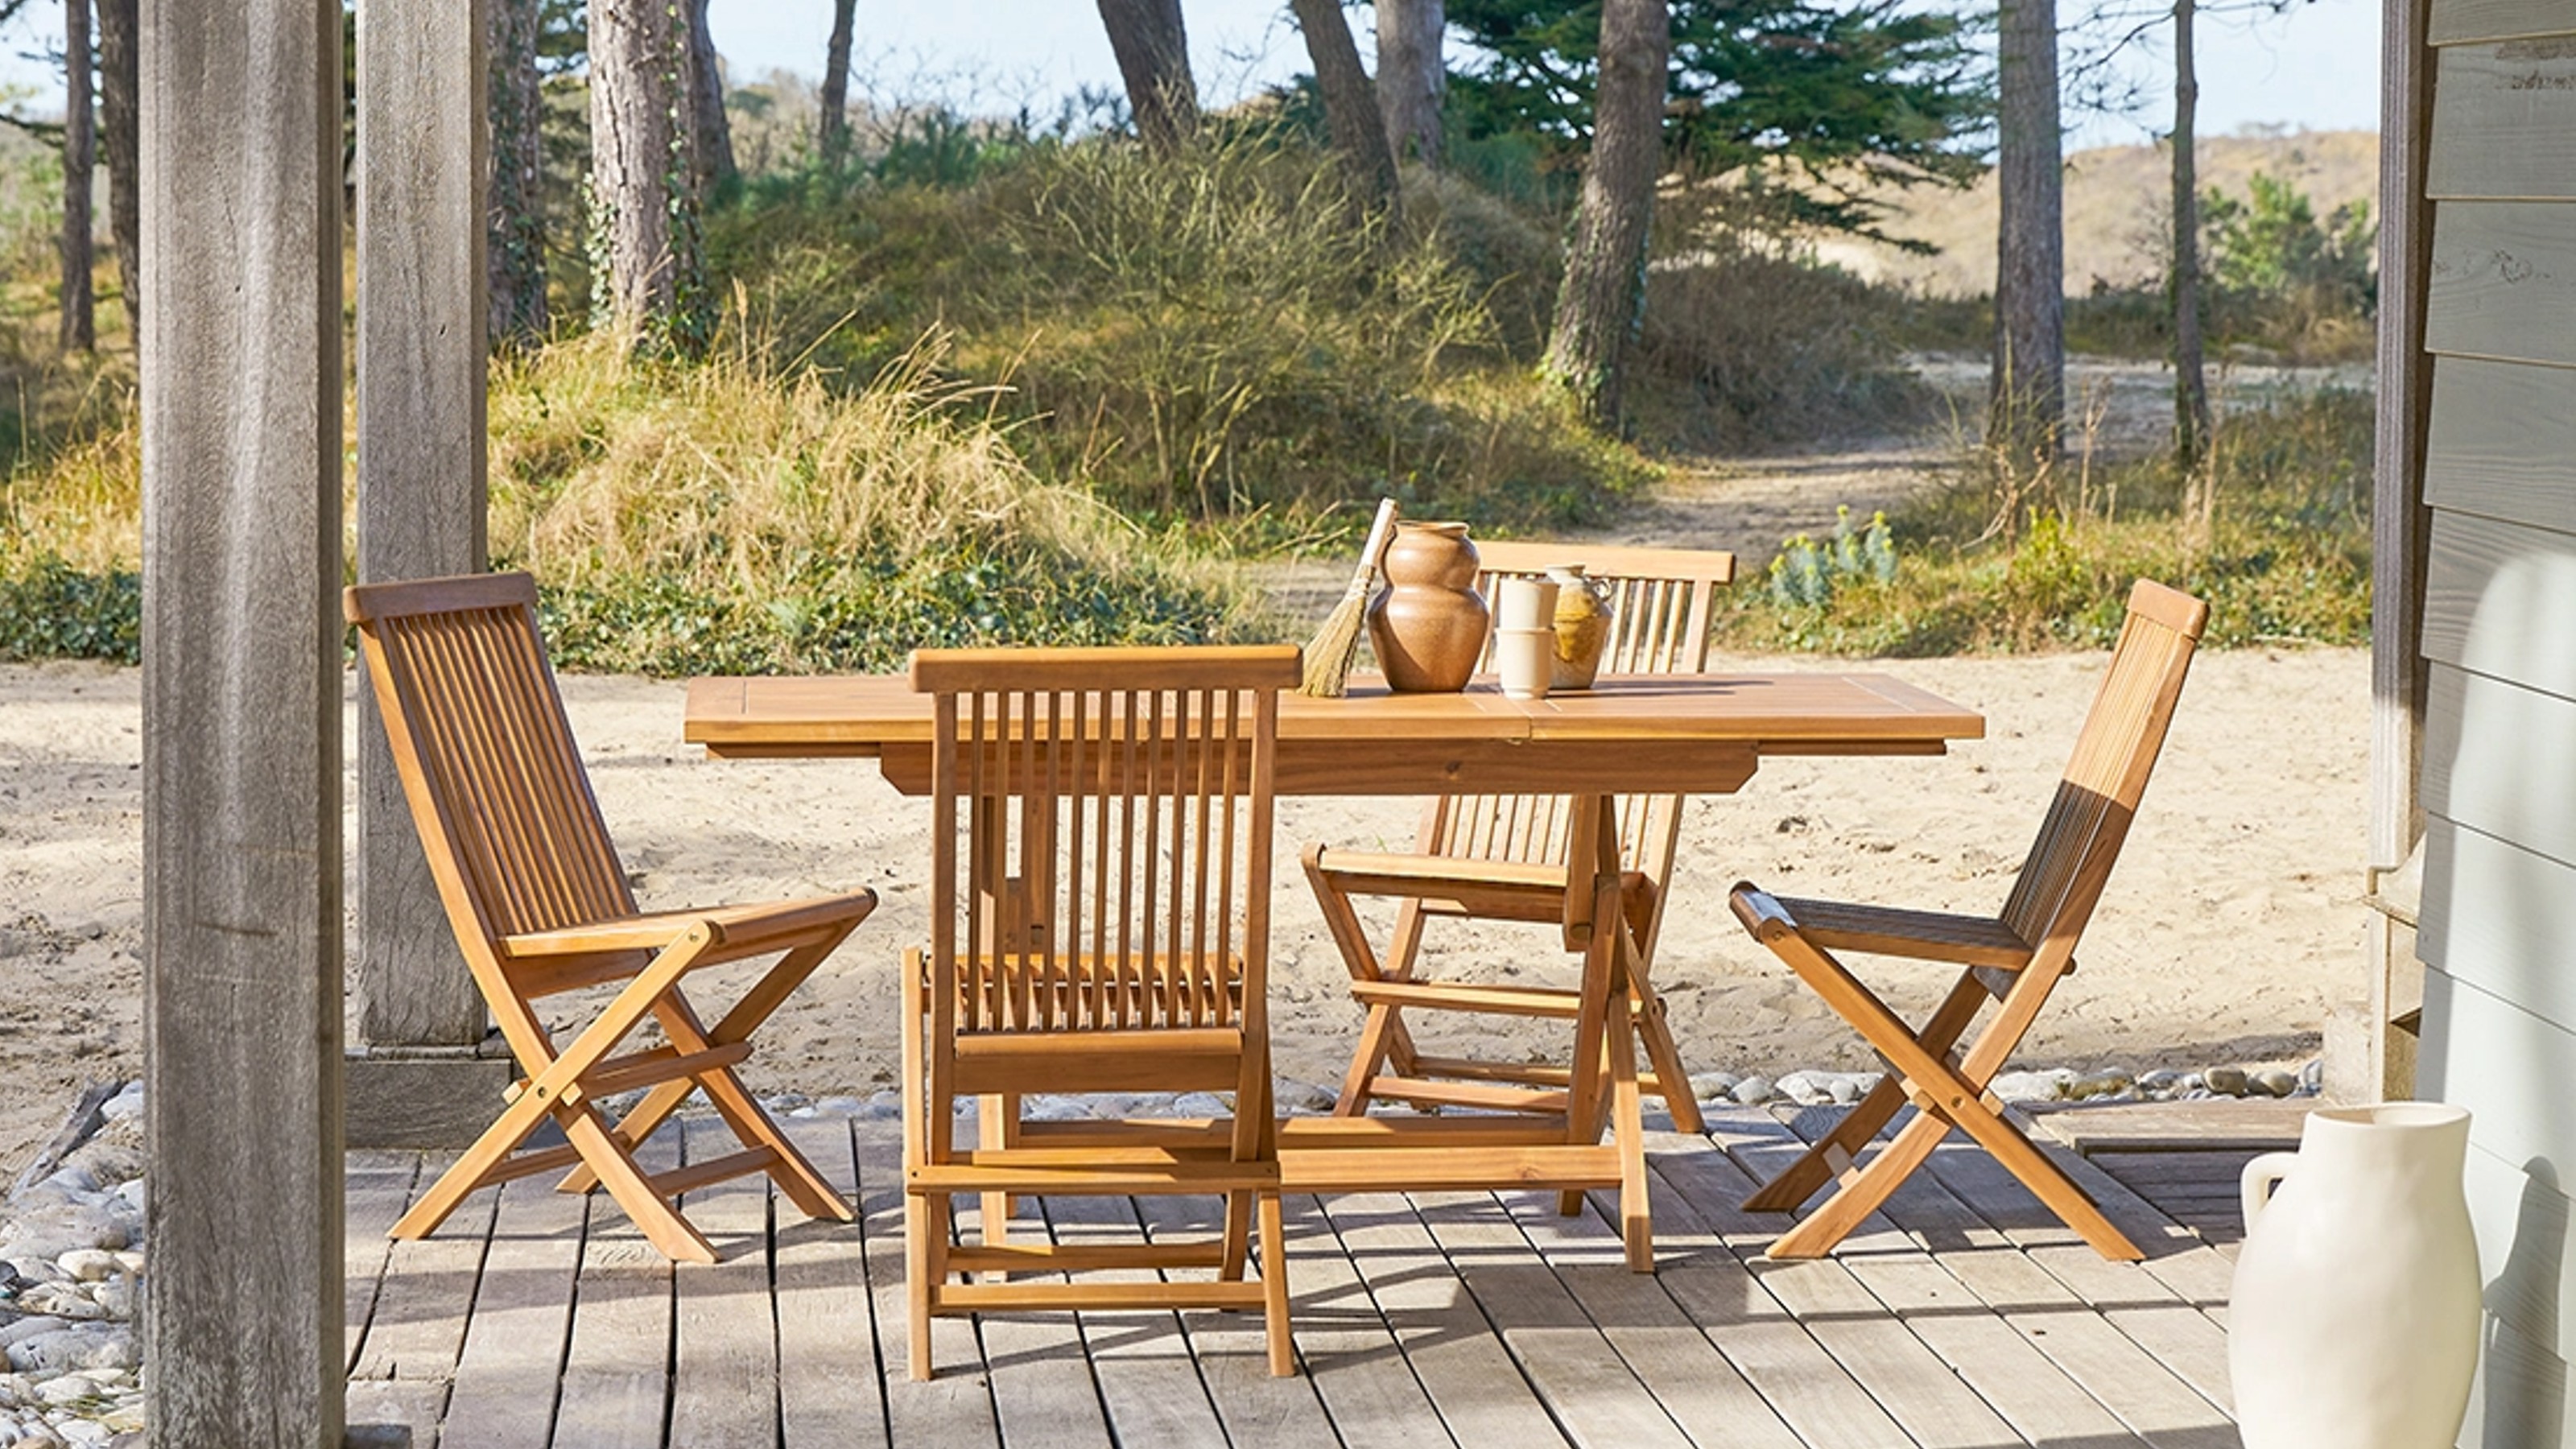 Sustainable Style: Wooden Garden Furniture Sets and Their Eco-Friendly Benefits